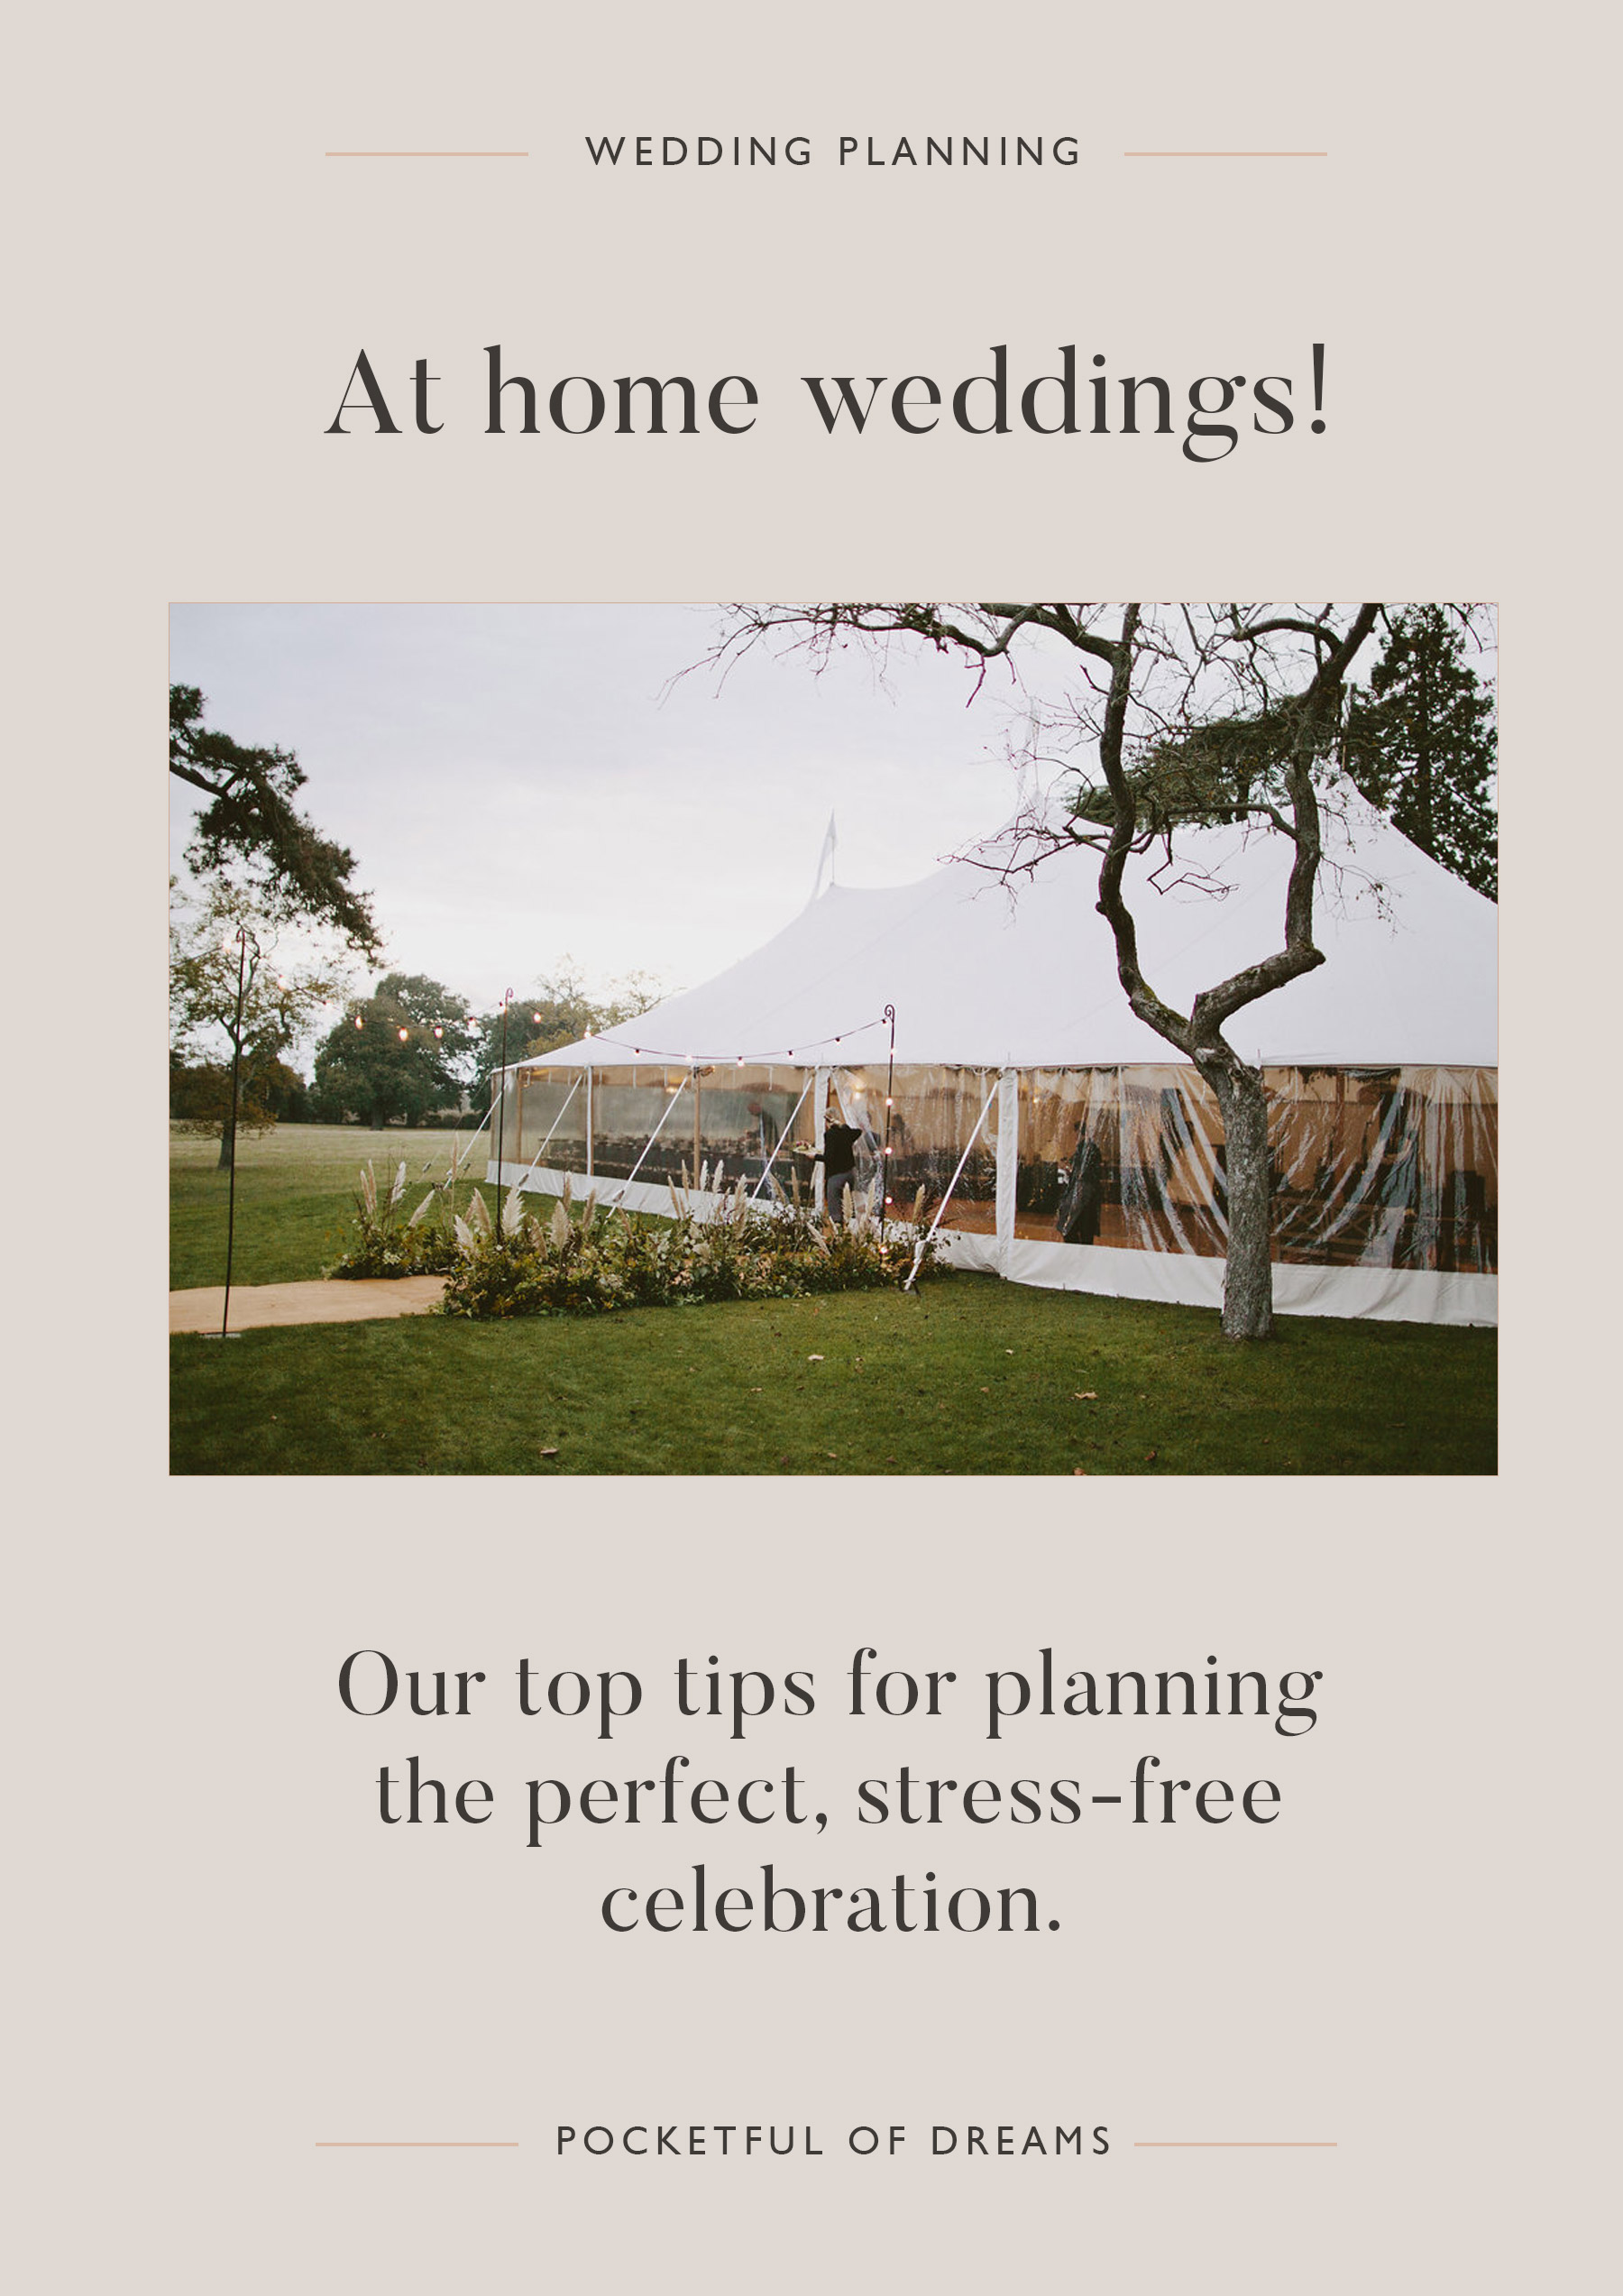 AT HOME WEDDINGS, Private Estate Weddings, top tips and advice, from wedding planning expert Michelle Kelly, Pocketful of Dreams. Luxury Wedding Planner